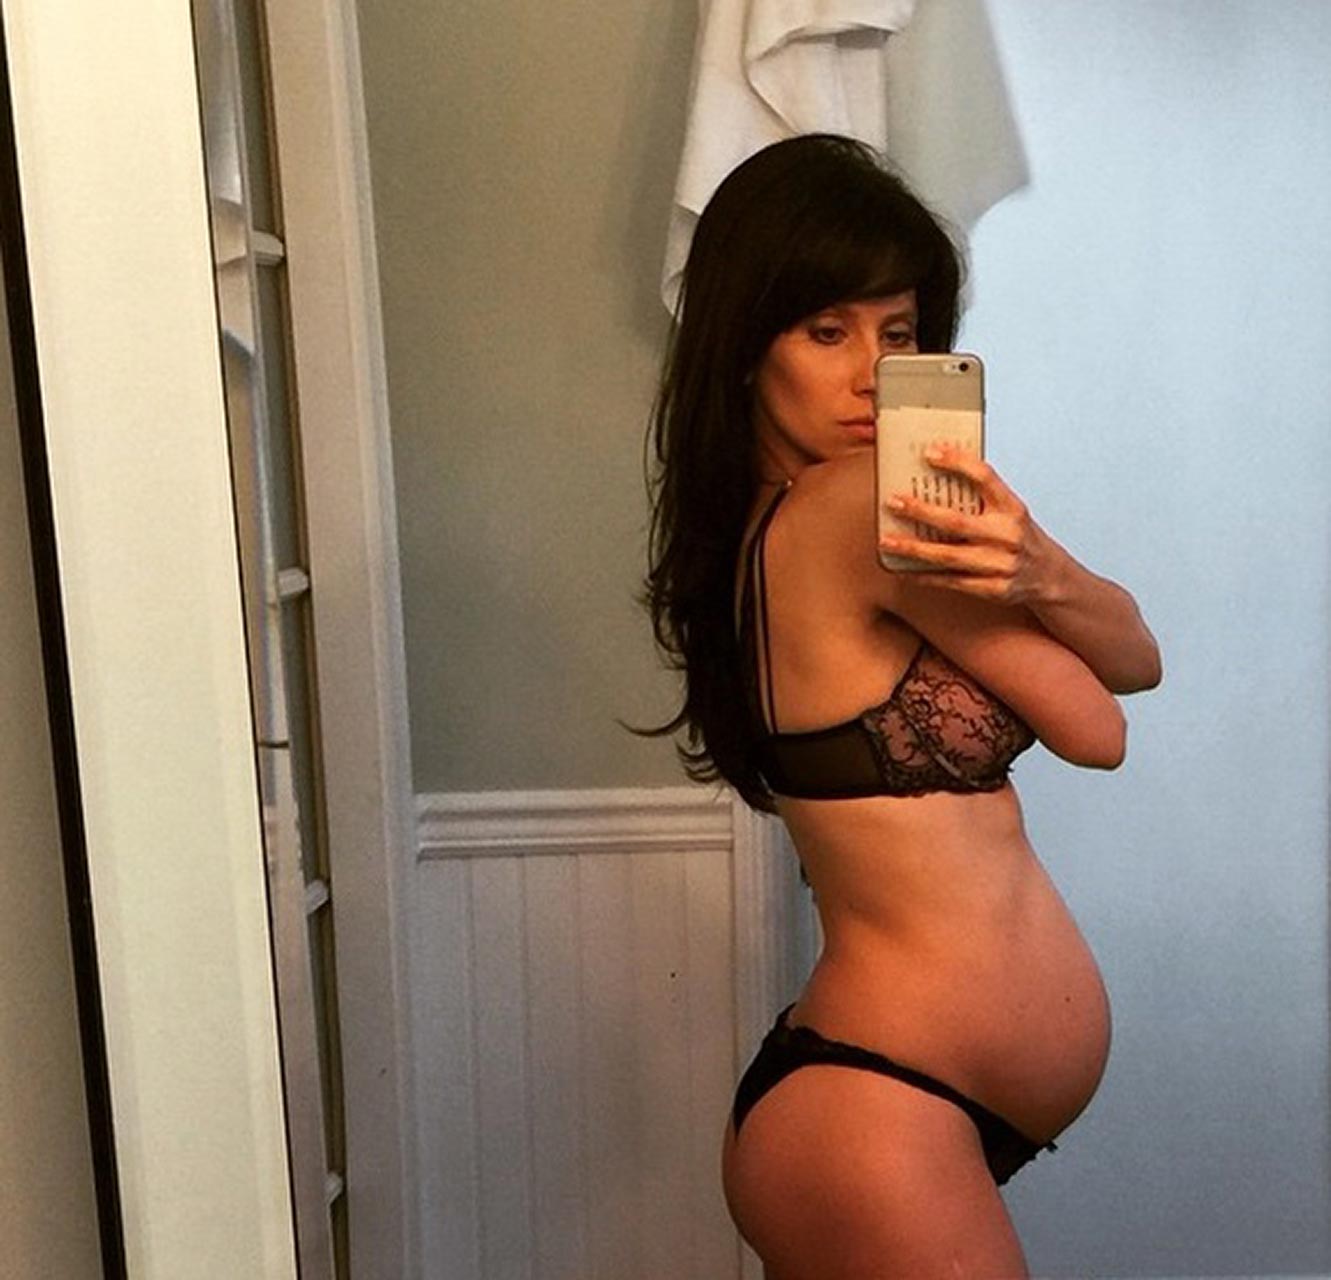 new selfie photo of Hilaria Baldwin from Instagram and other half naked bab...